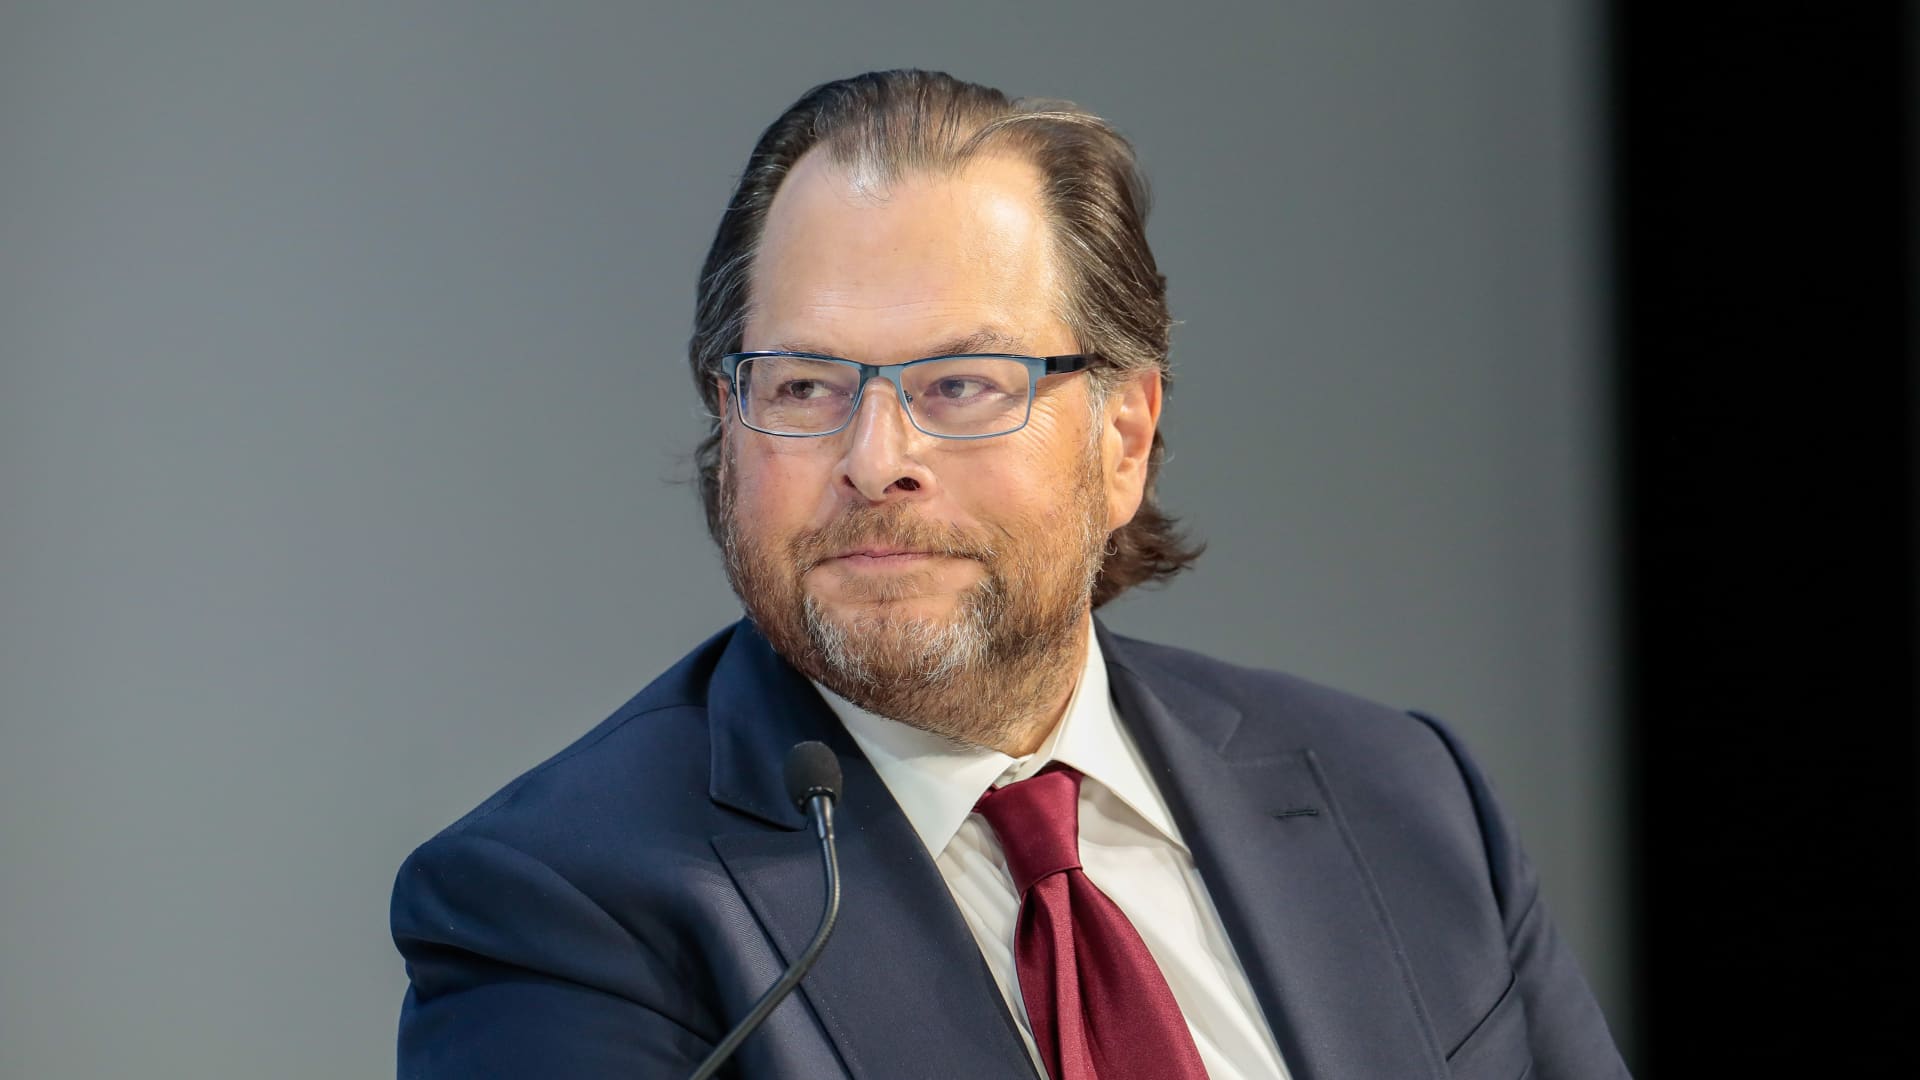 Salesforce CEO Marc Benioff says foreign exchange pushed the company to lower revenue guidance - CNBC